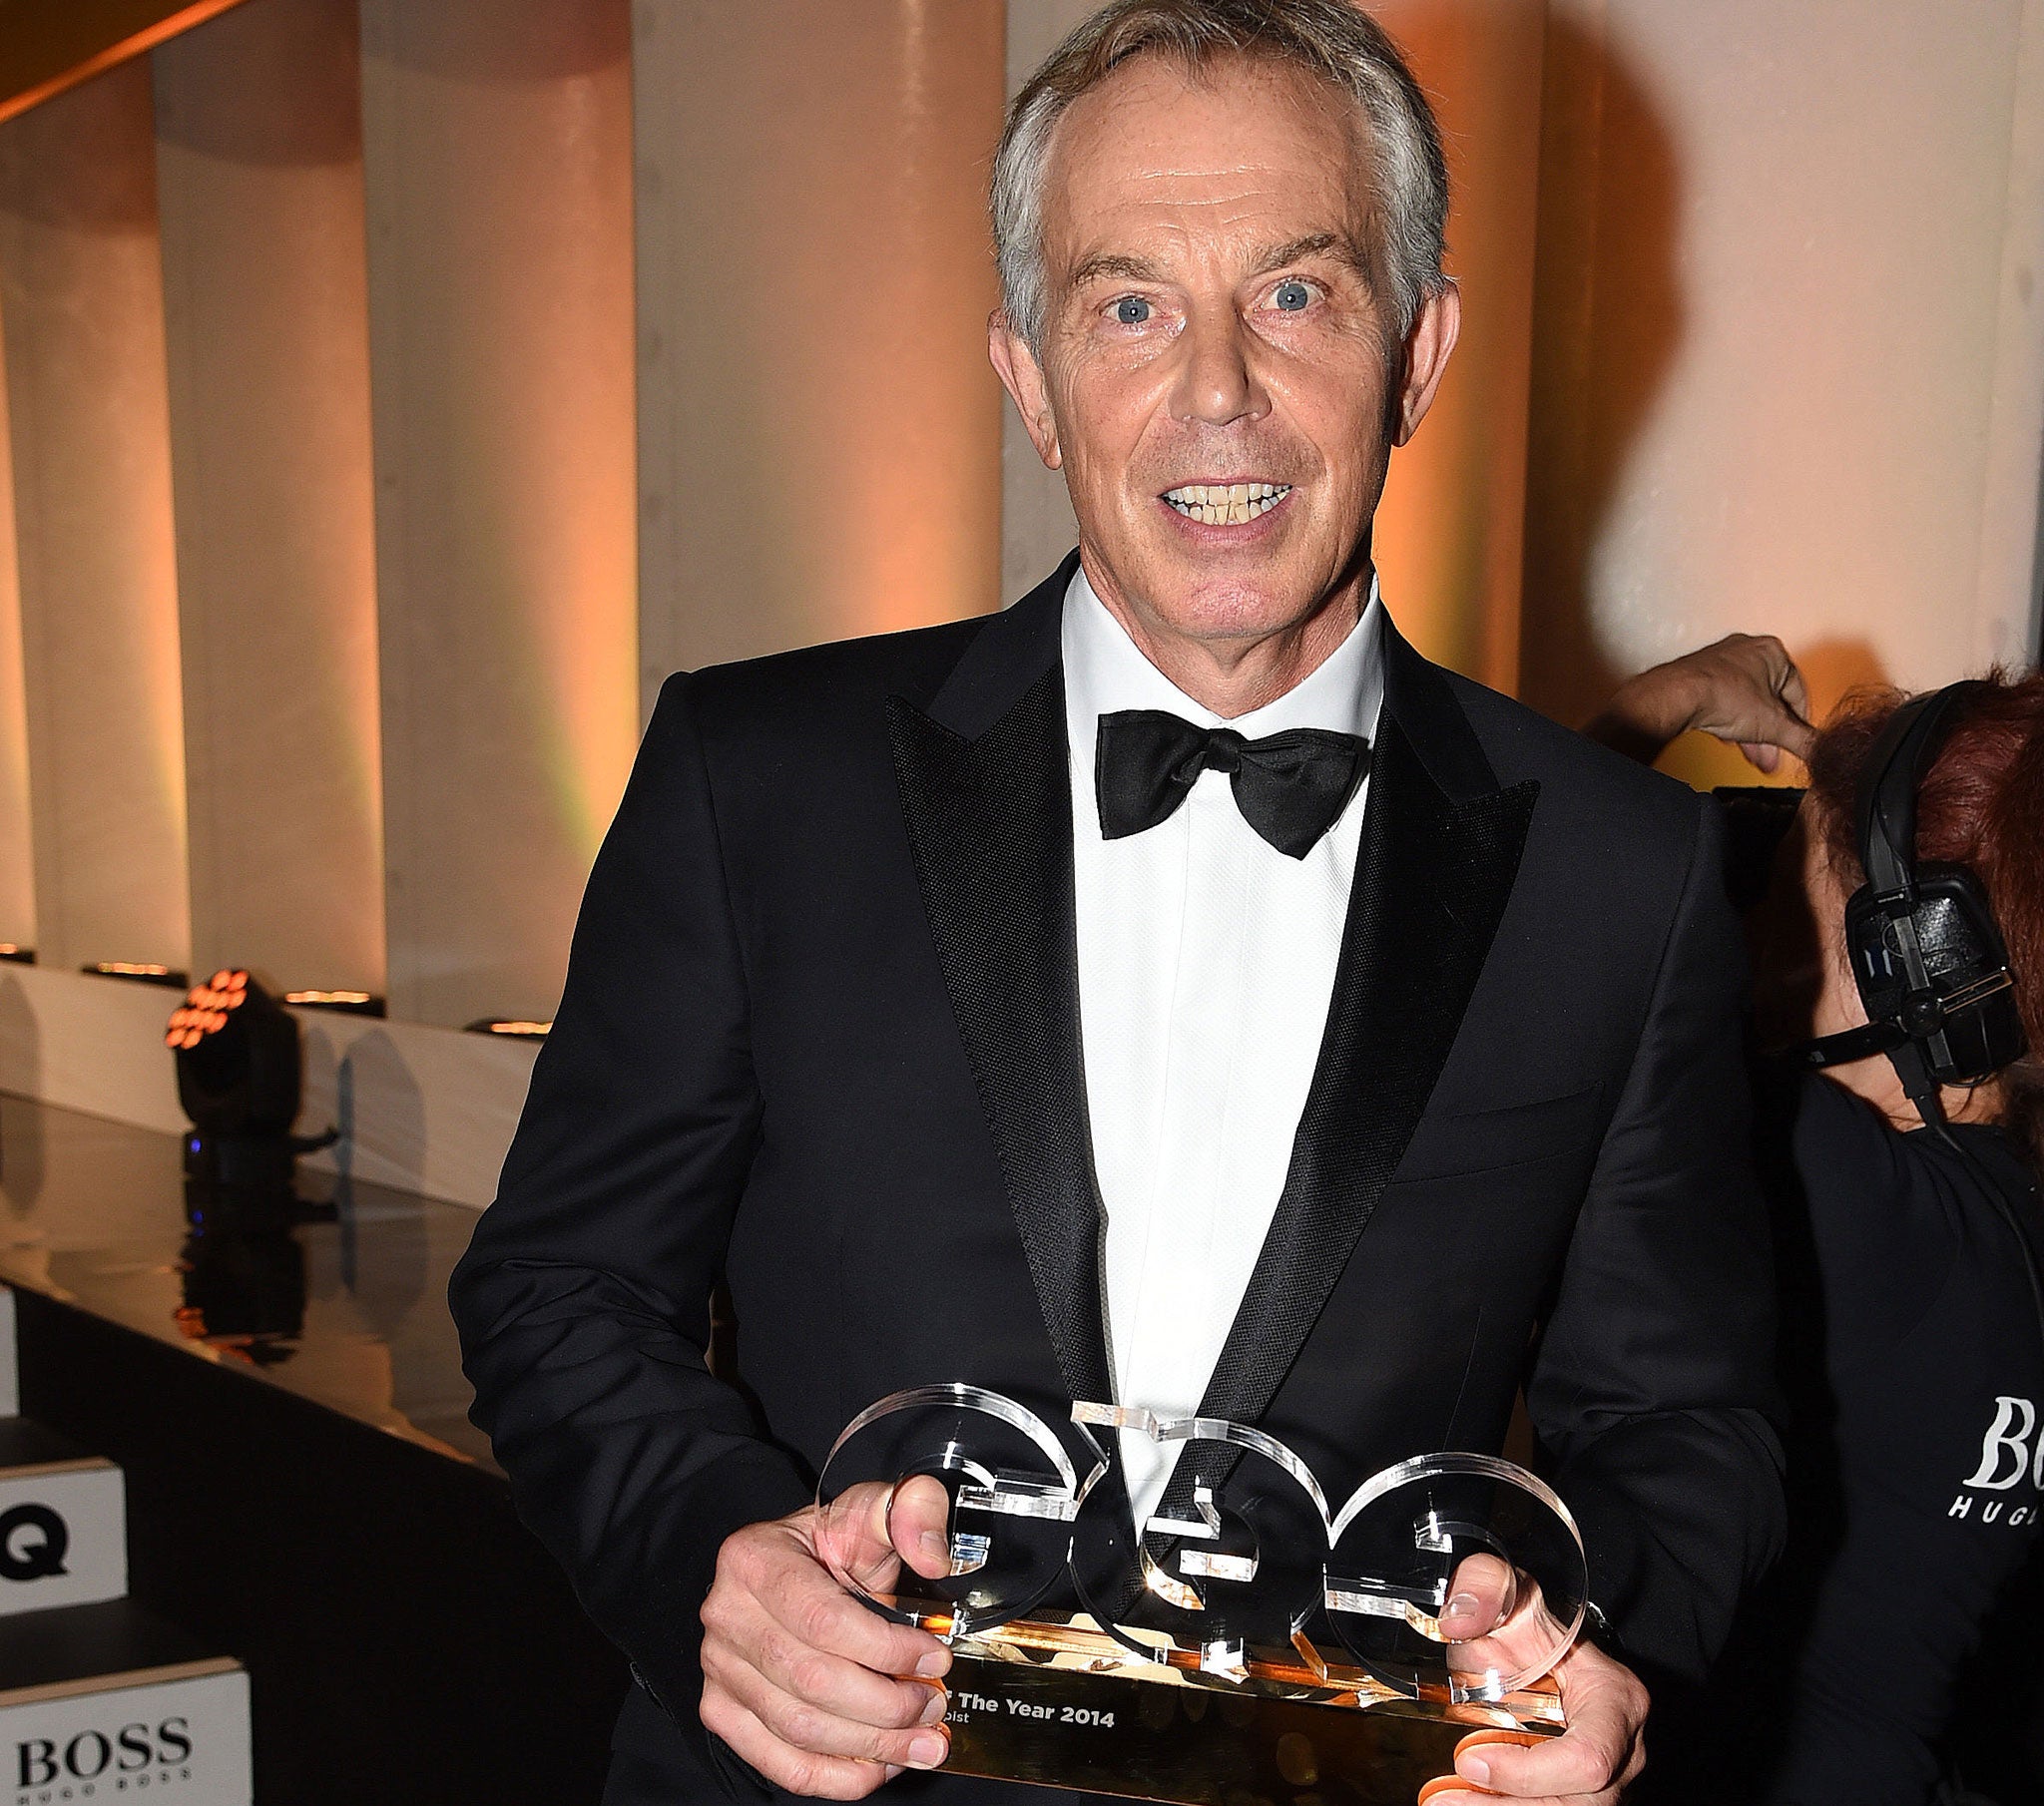 Tony Blair Philanthropist of the Year award defended by GQ The Independent The Independent pic